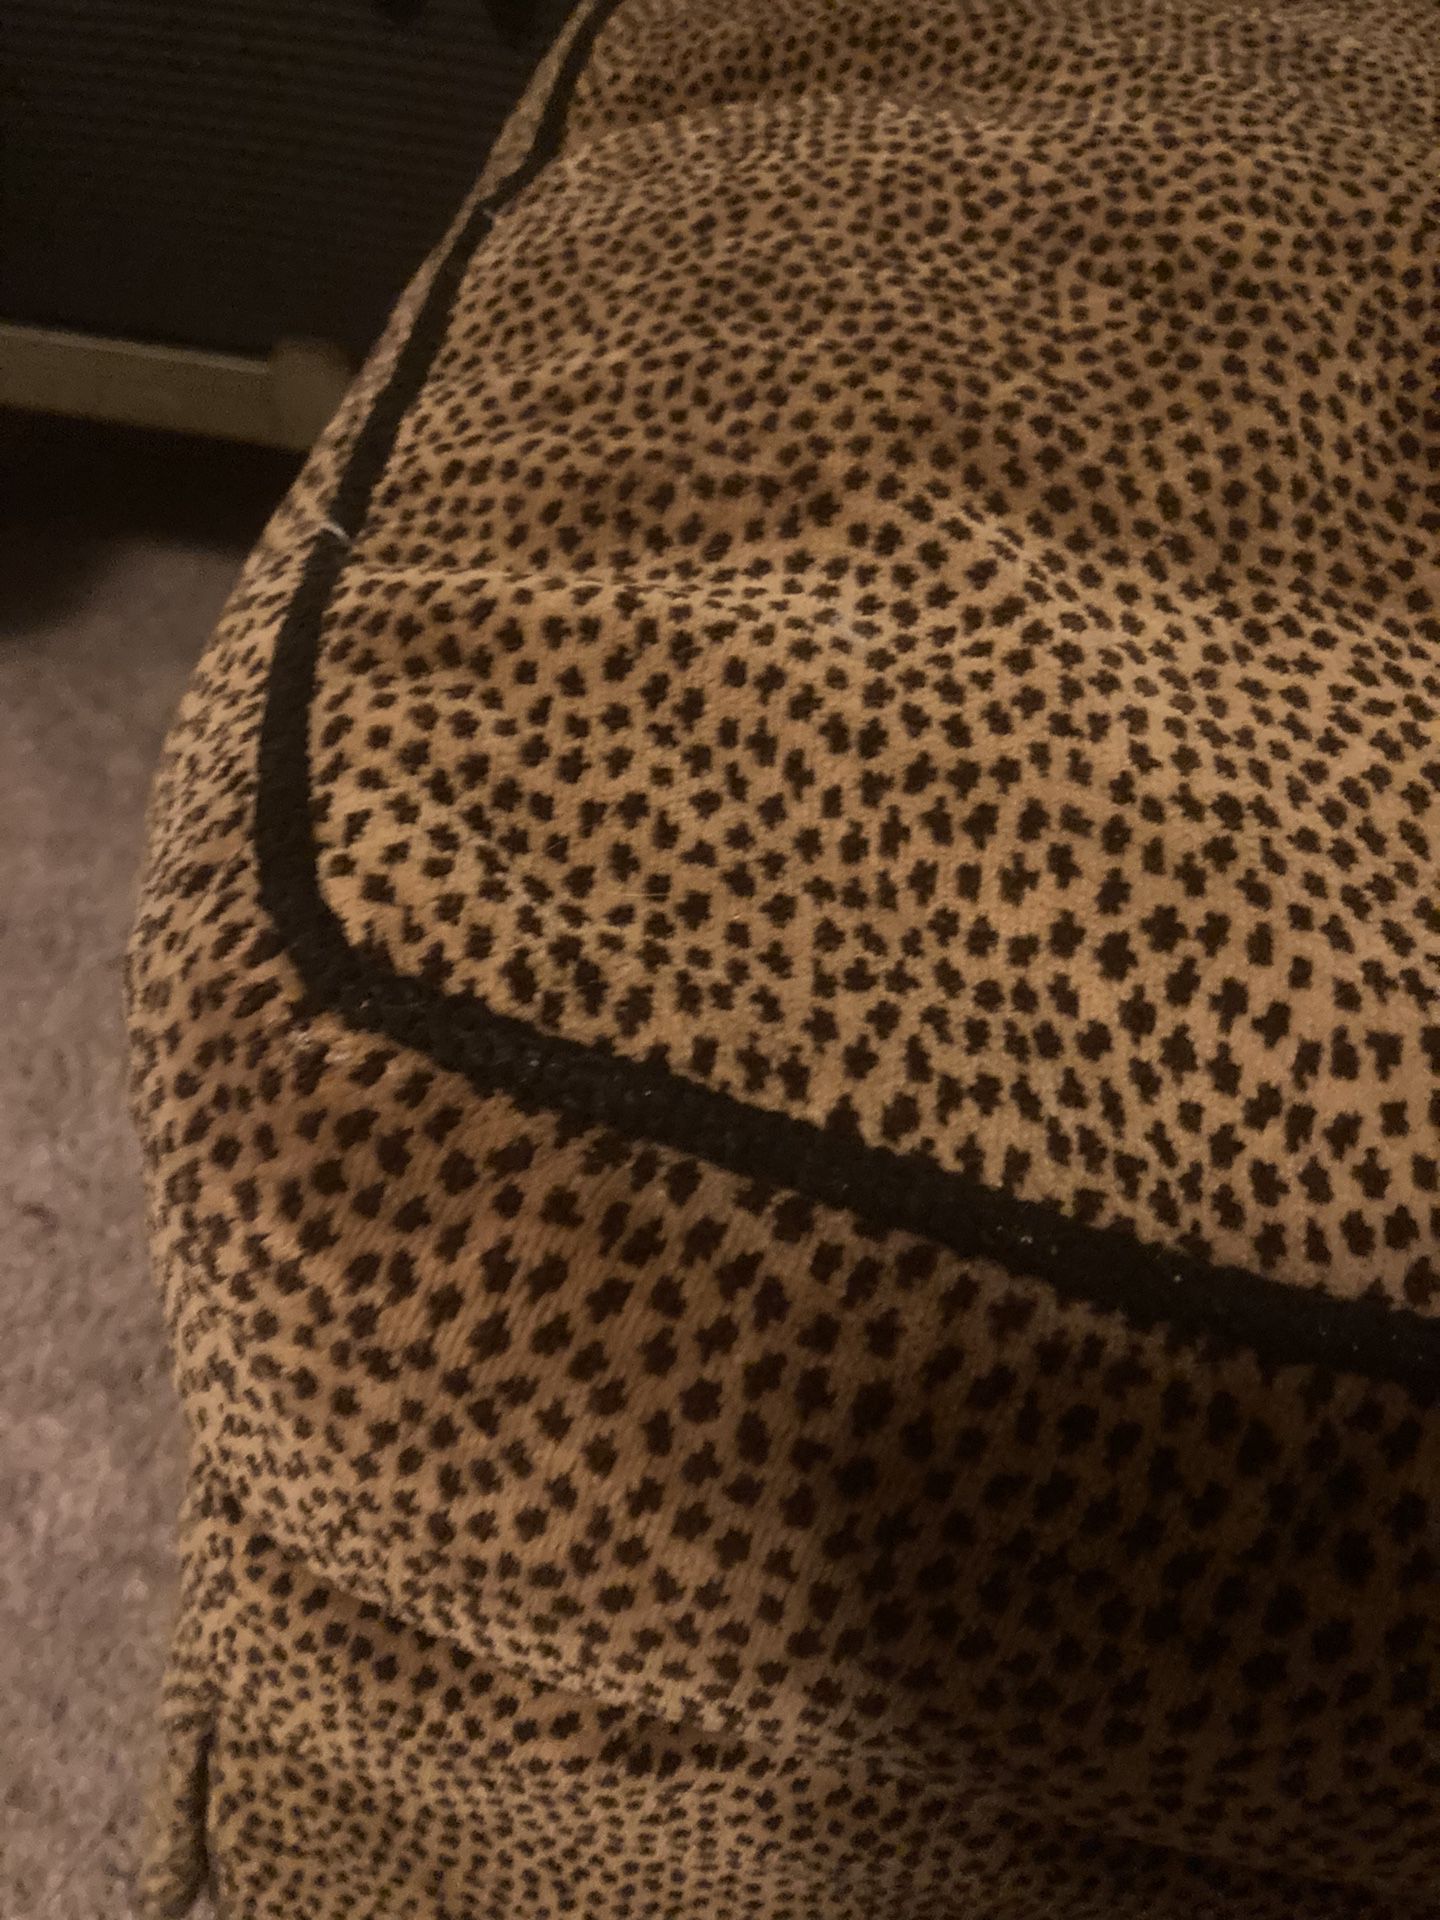 Chair and ottoman, matching, custom-made, call $650, selling for 150 animal print price is firm at